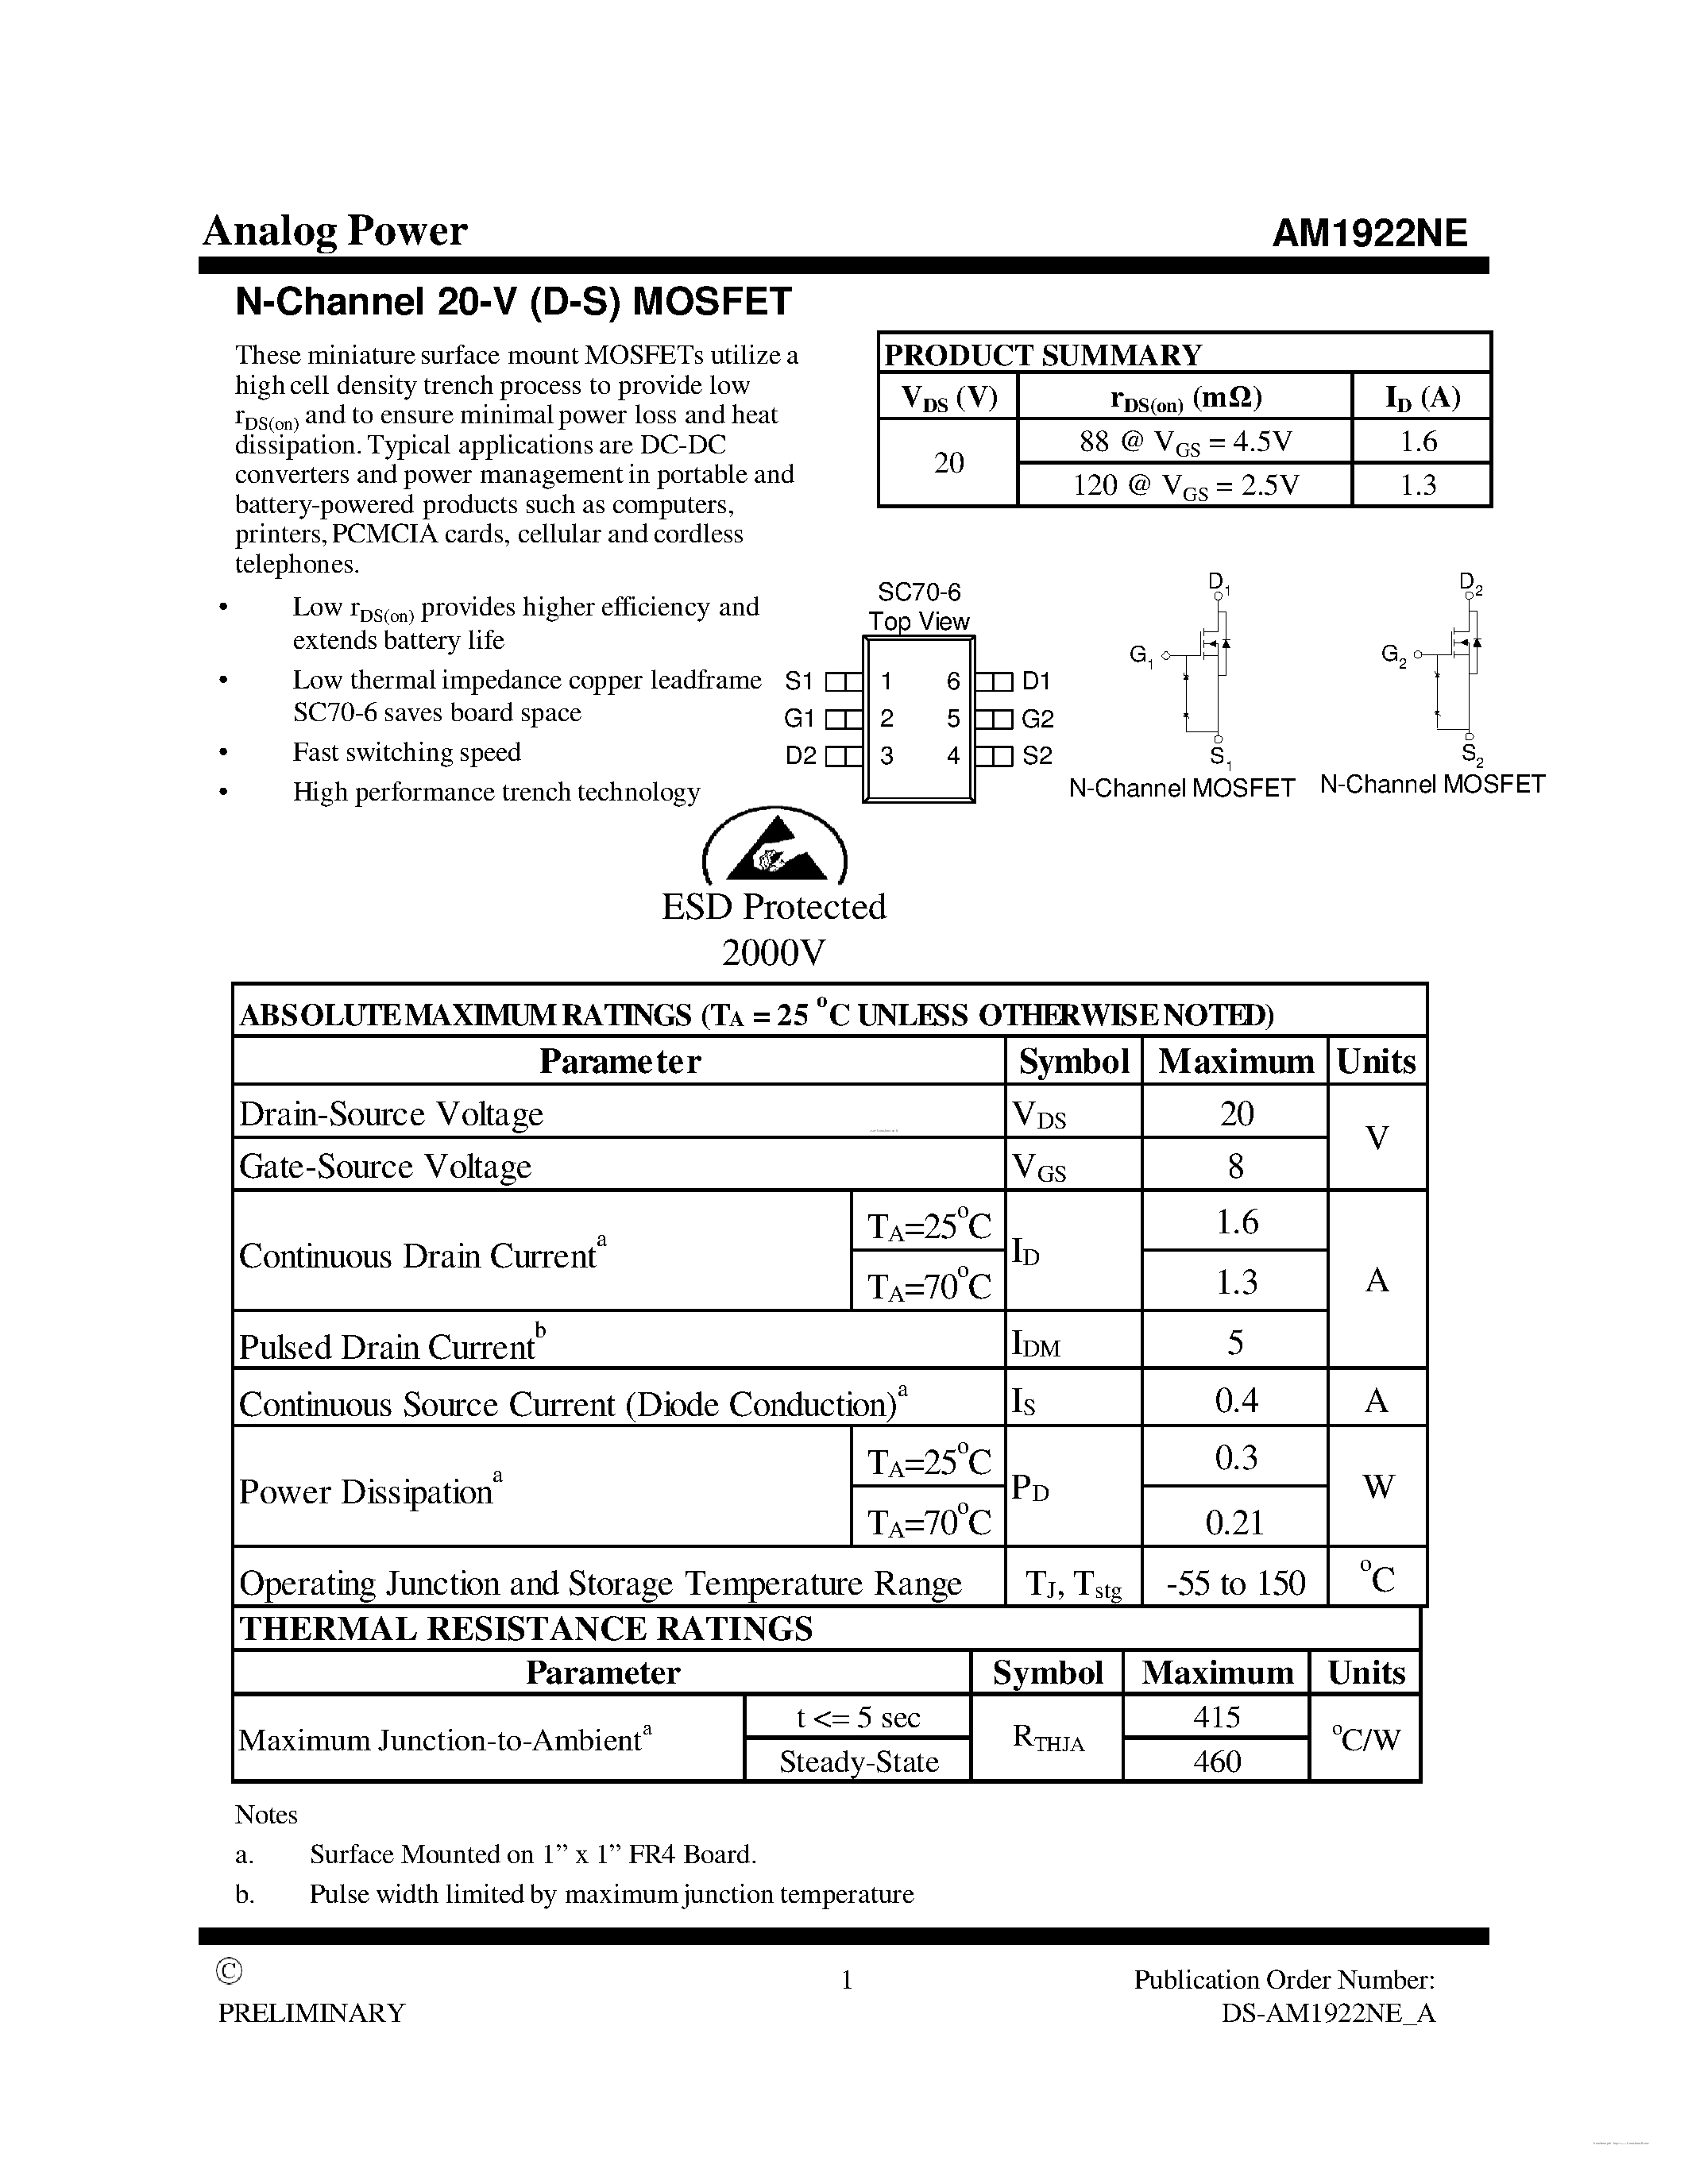 Datasheet AM1922NE - N-Channel 20-V (D-S) MOSFET page 1